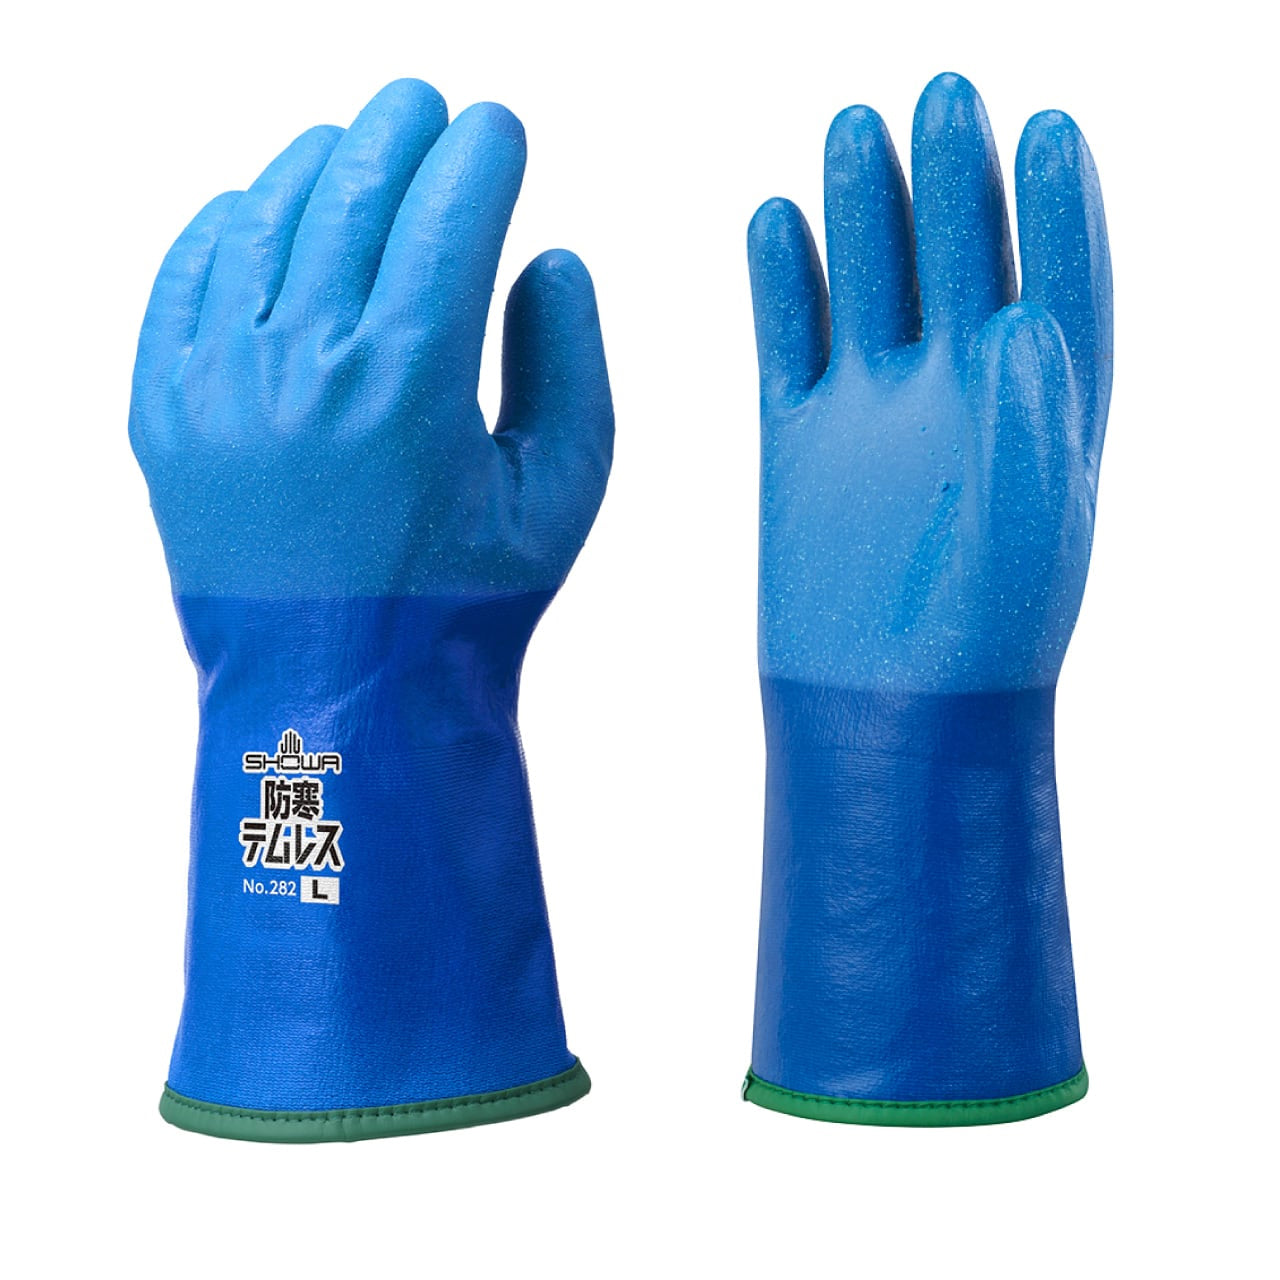 SHOWA® ATLAS® Tem-Res 282 Insulating Gloves PU Coated,, 57% OFF